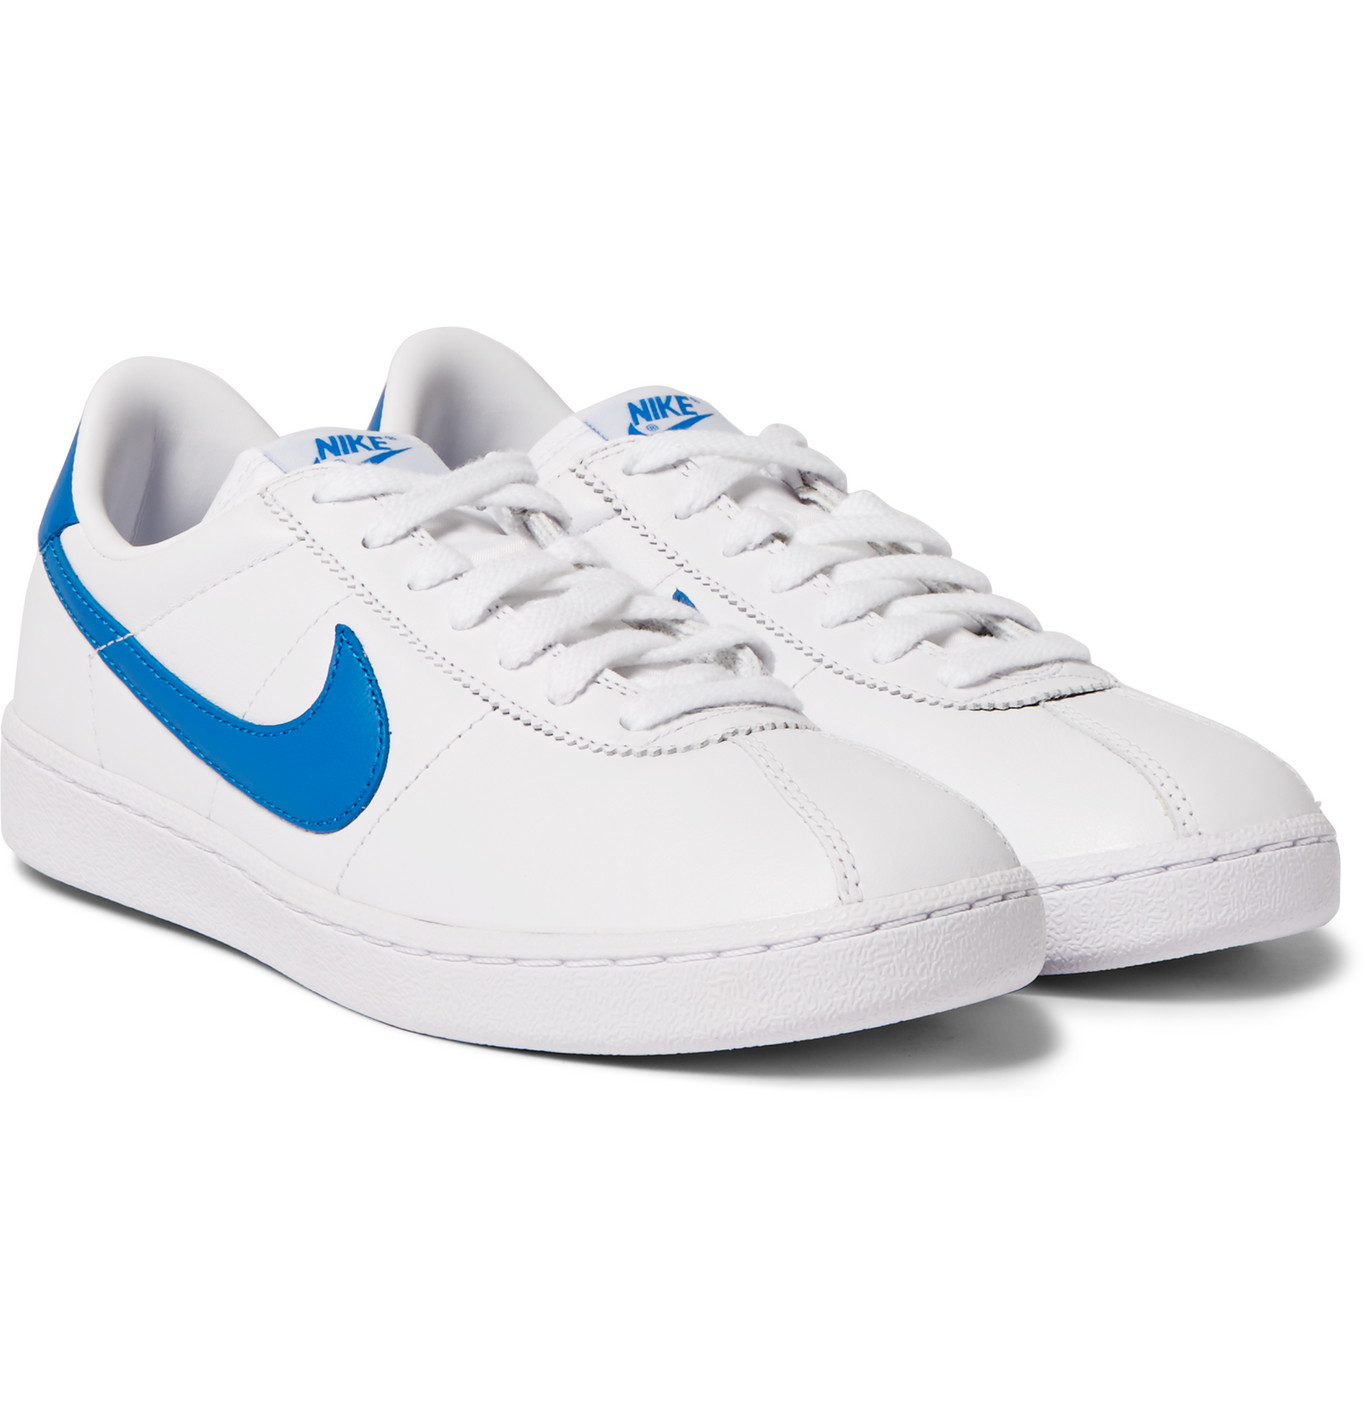 nike bruin qs leather